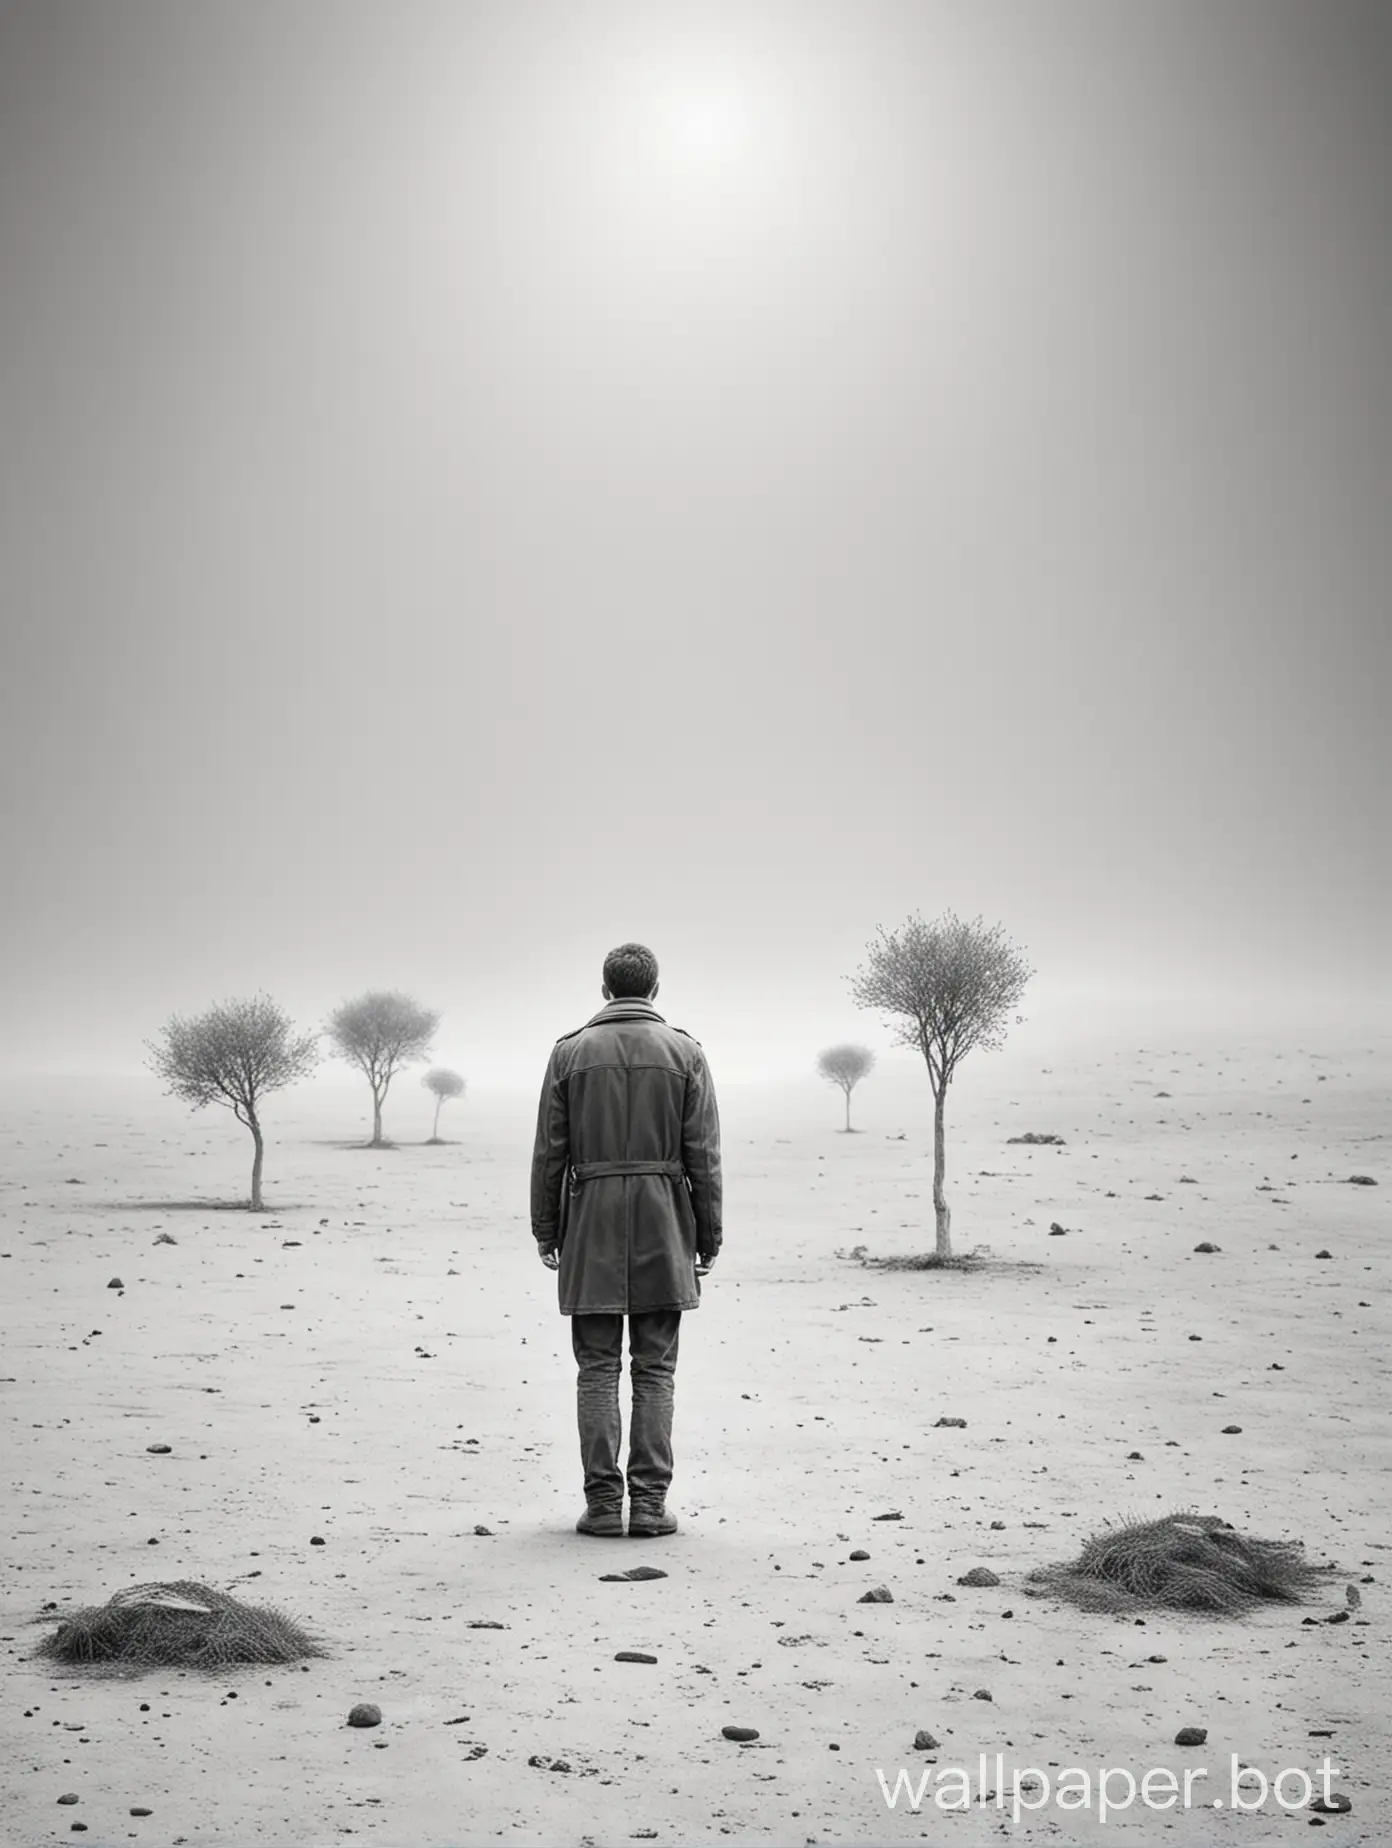 Ignored lonely man in a far far away land. Back and white background